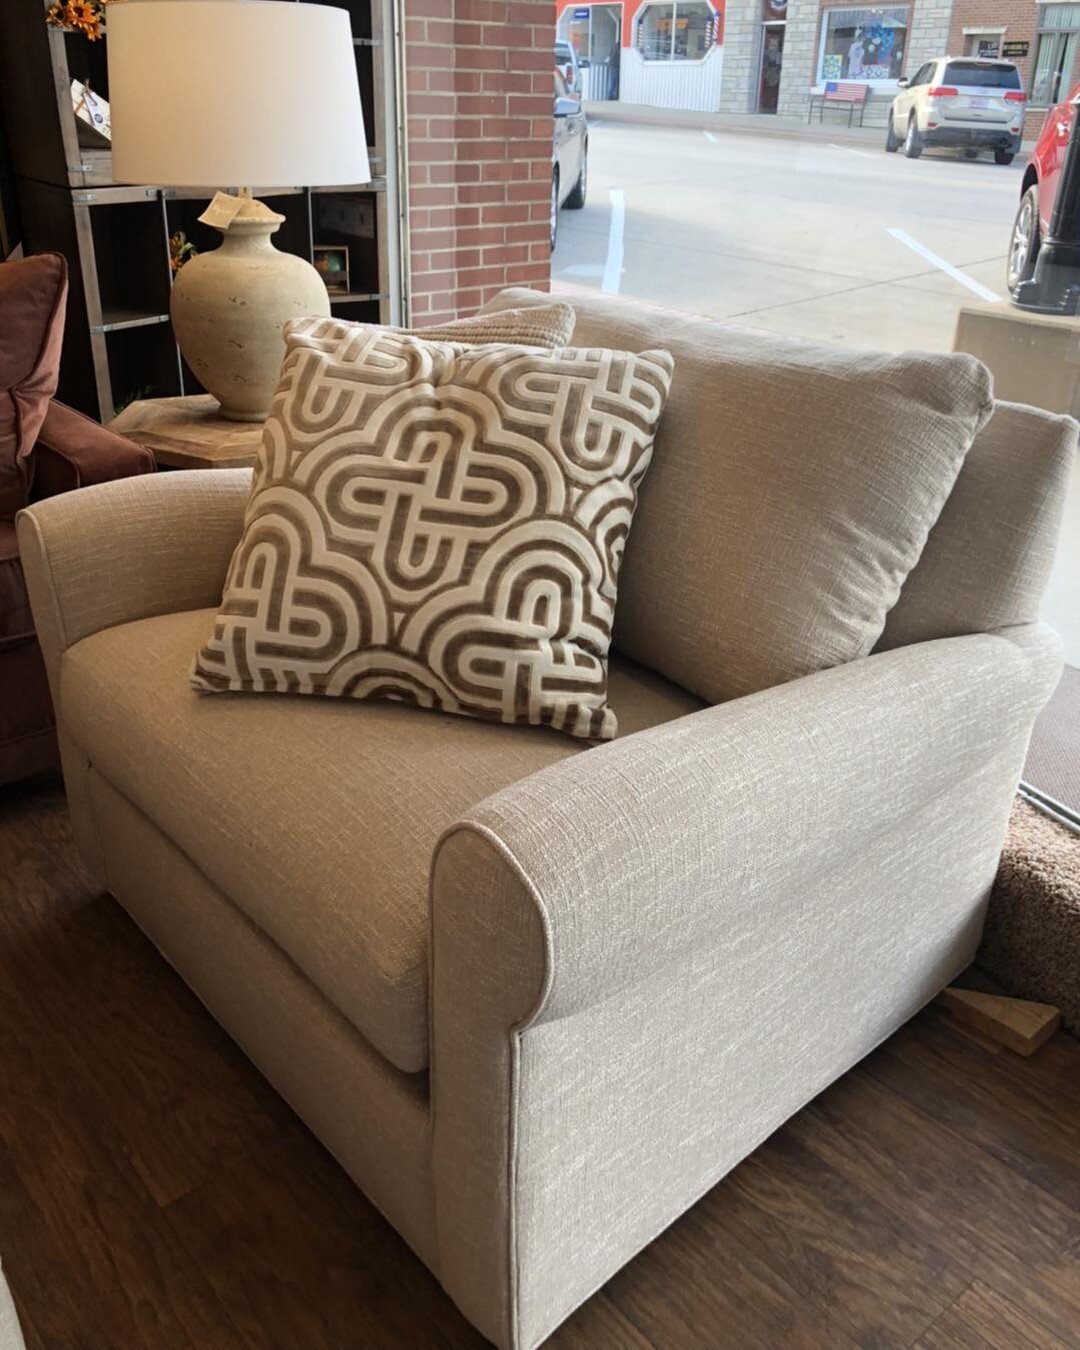 Grab someone for some snuggle time or relax on your own with the extra space when you purchase one of our chair &amp;1/2. 
These are on our floor and are currently 20% off. 

#dyersville #idealdecorating #guttenberg #shoplocal #furniture #iowa #shops